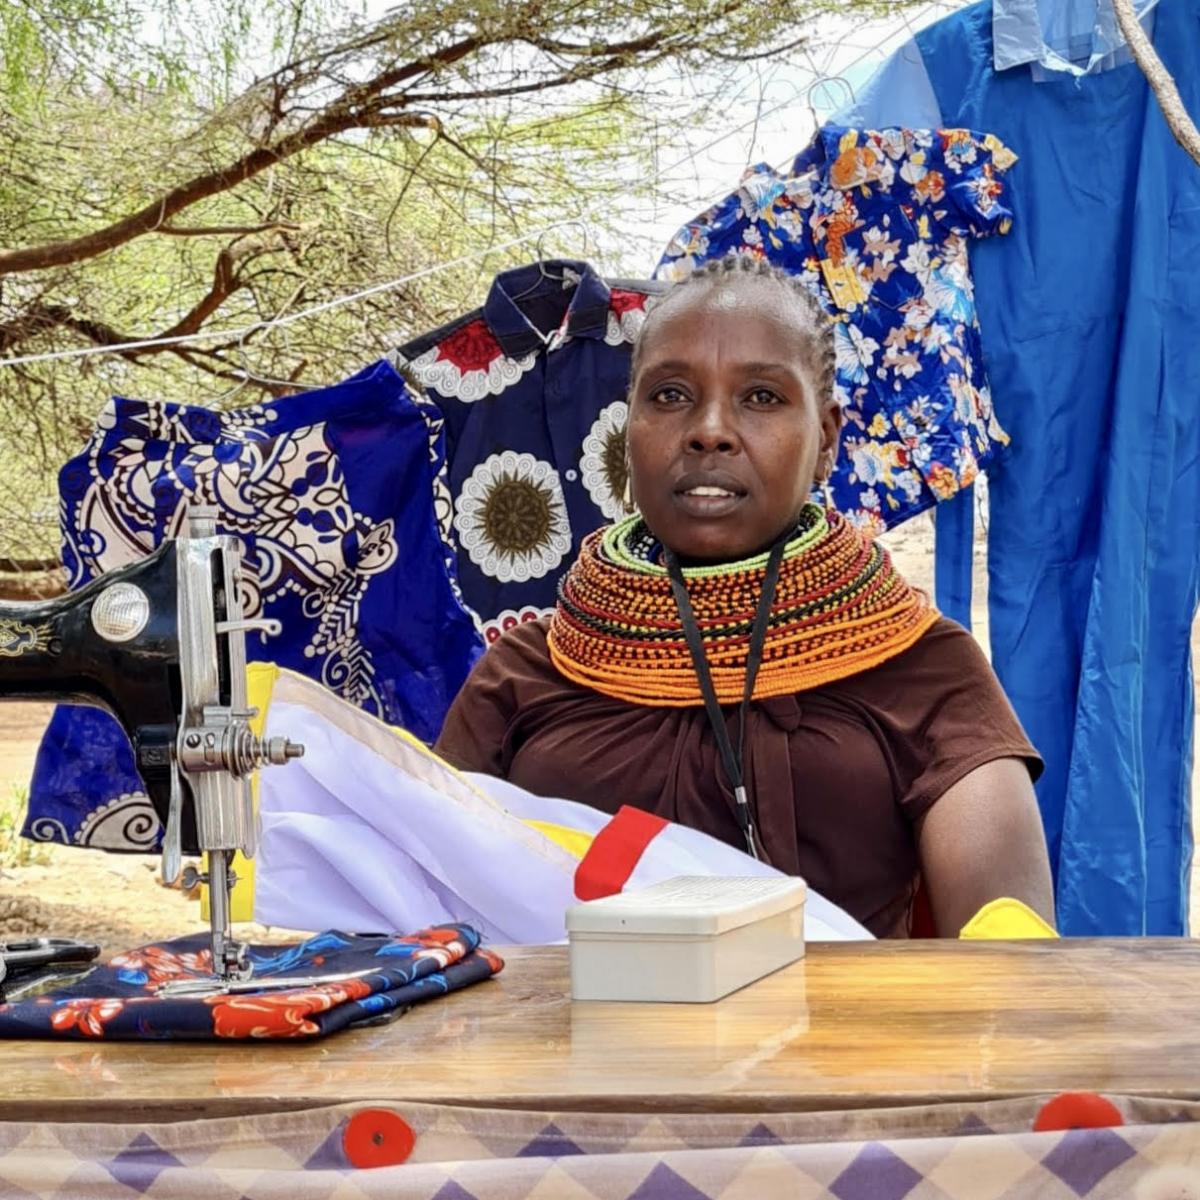 Jane Asimit launched her own seamstress business from home after receiving USAID-supported vocational training and a sewing machine. It has since grown into a successful local shop training young women. Photo: Norin Walimohamed/USAID